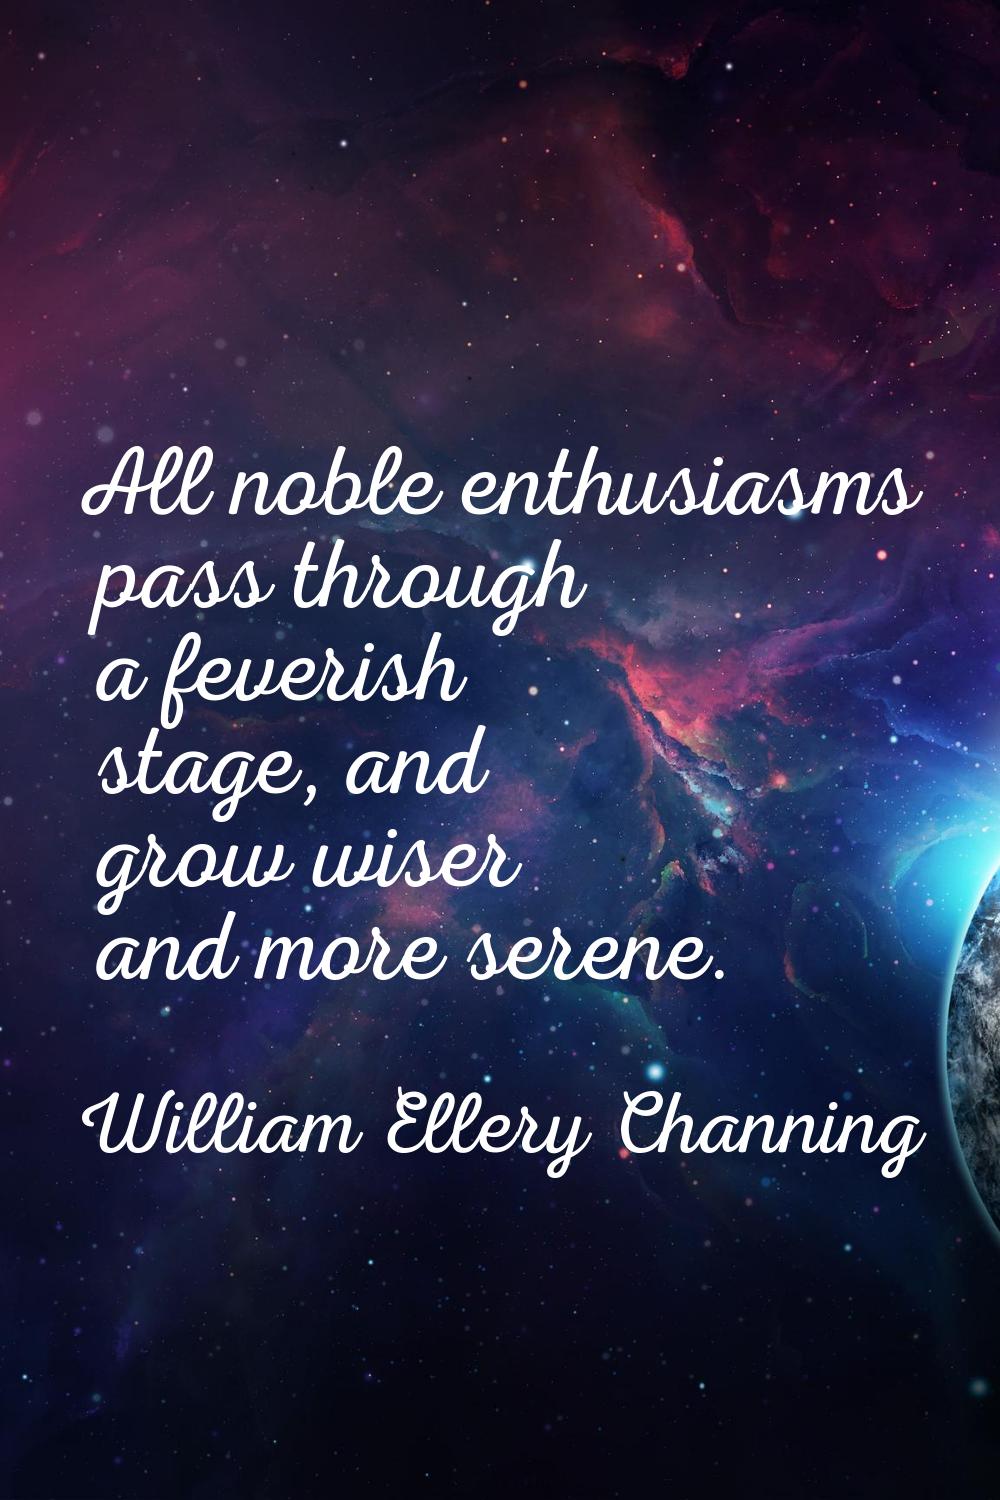 All noble enthusiasms pass through a feverish stage, and grow wiser and more serene.